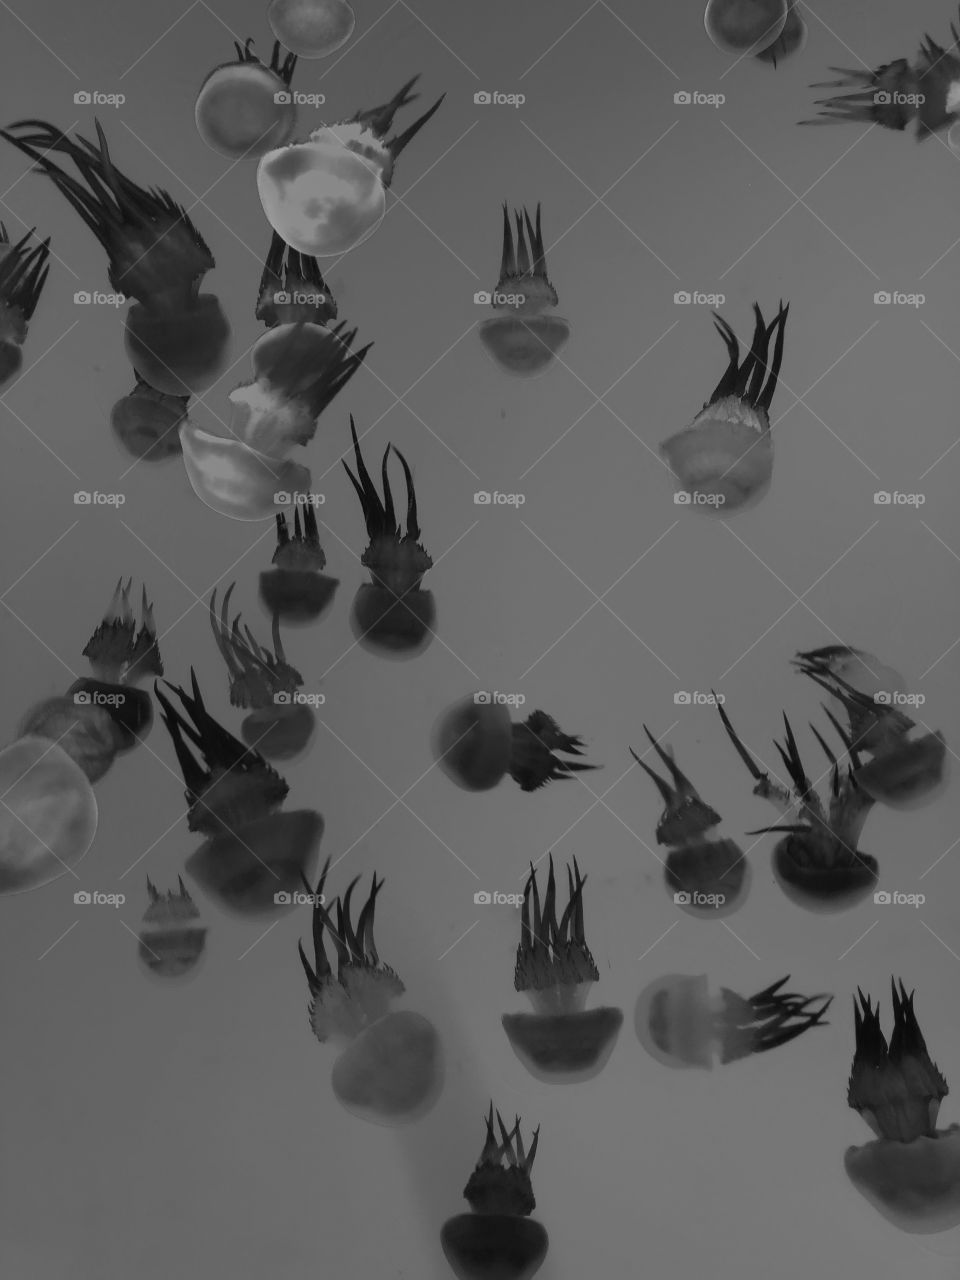 A lot of jellyfishes in black and white makes it look like a x-ray sheet